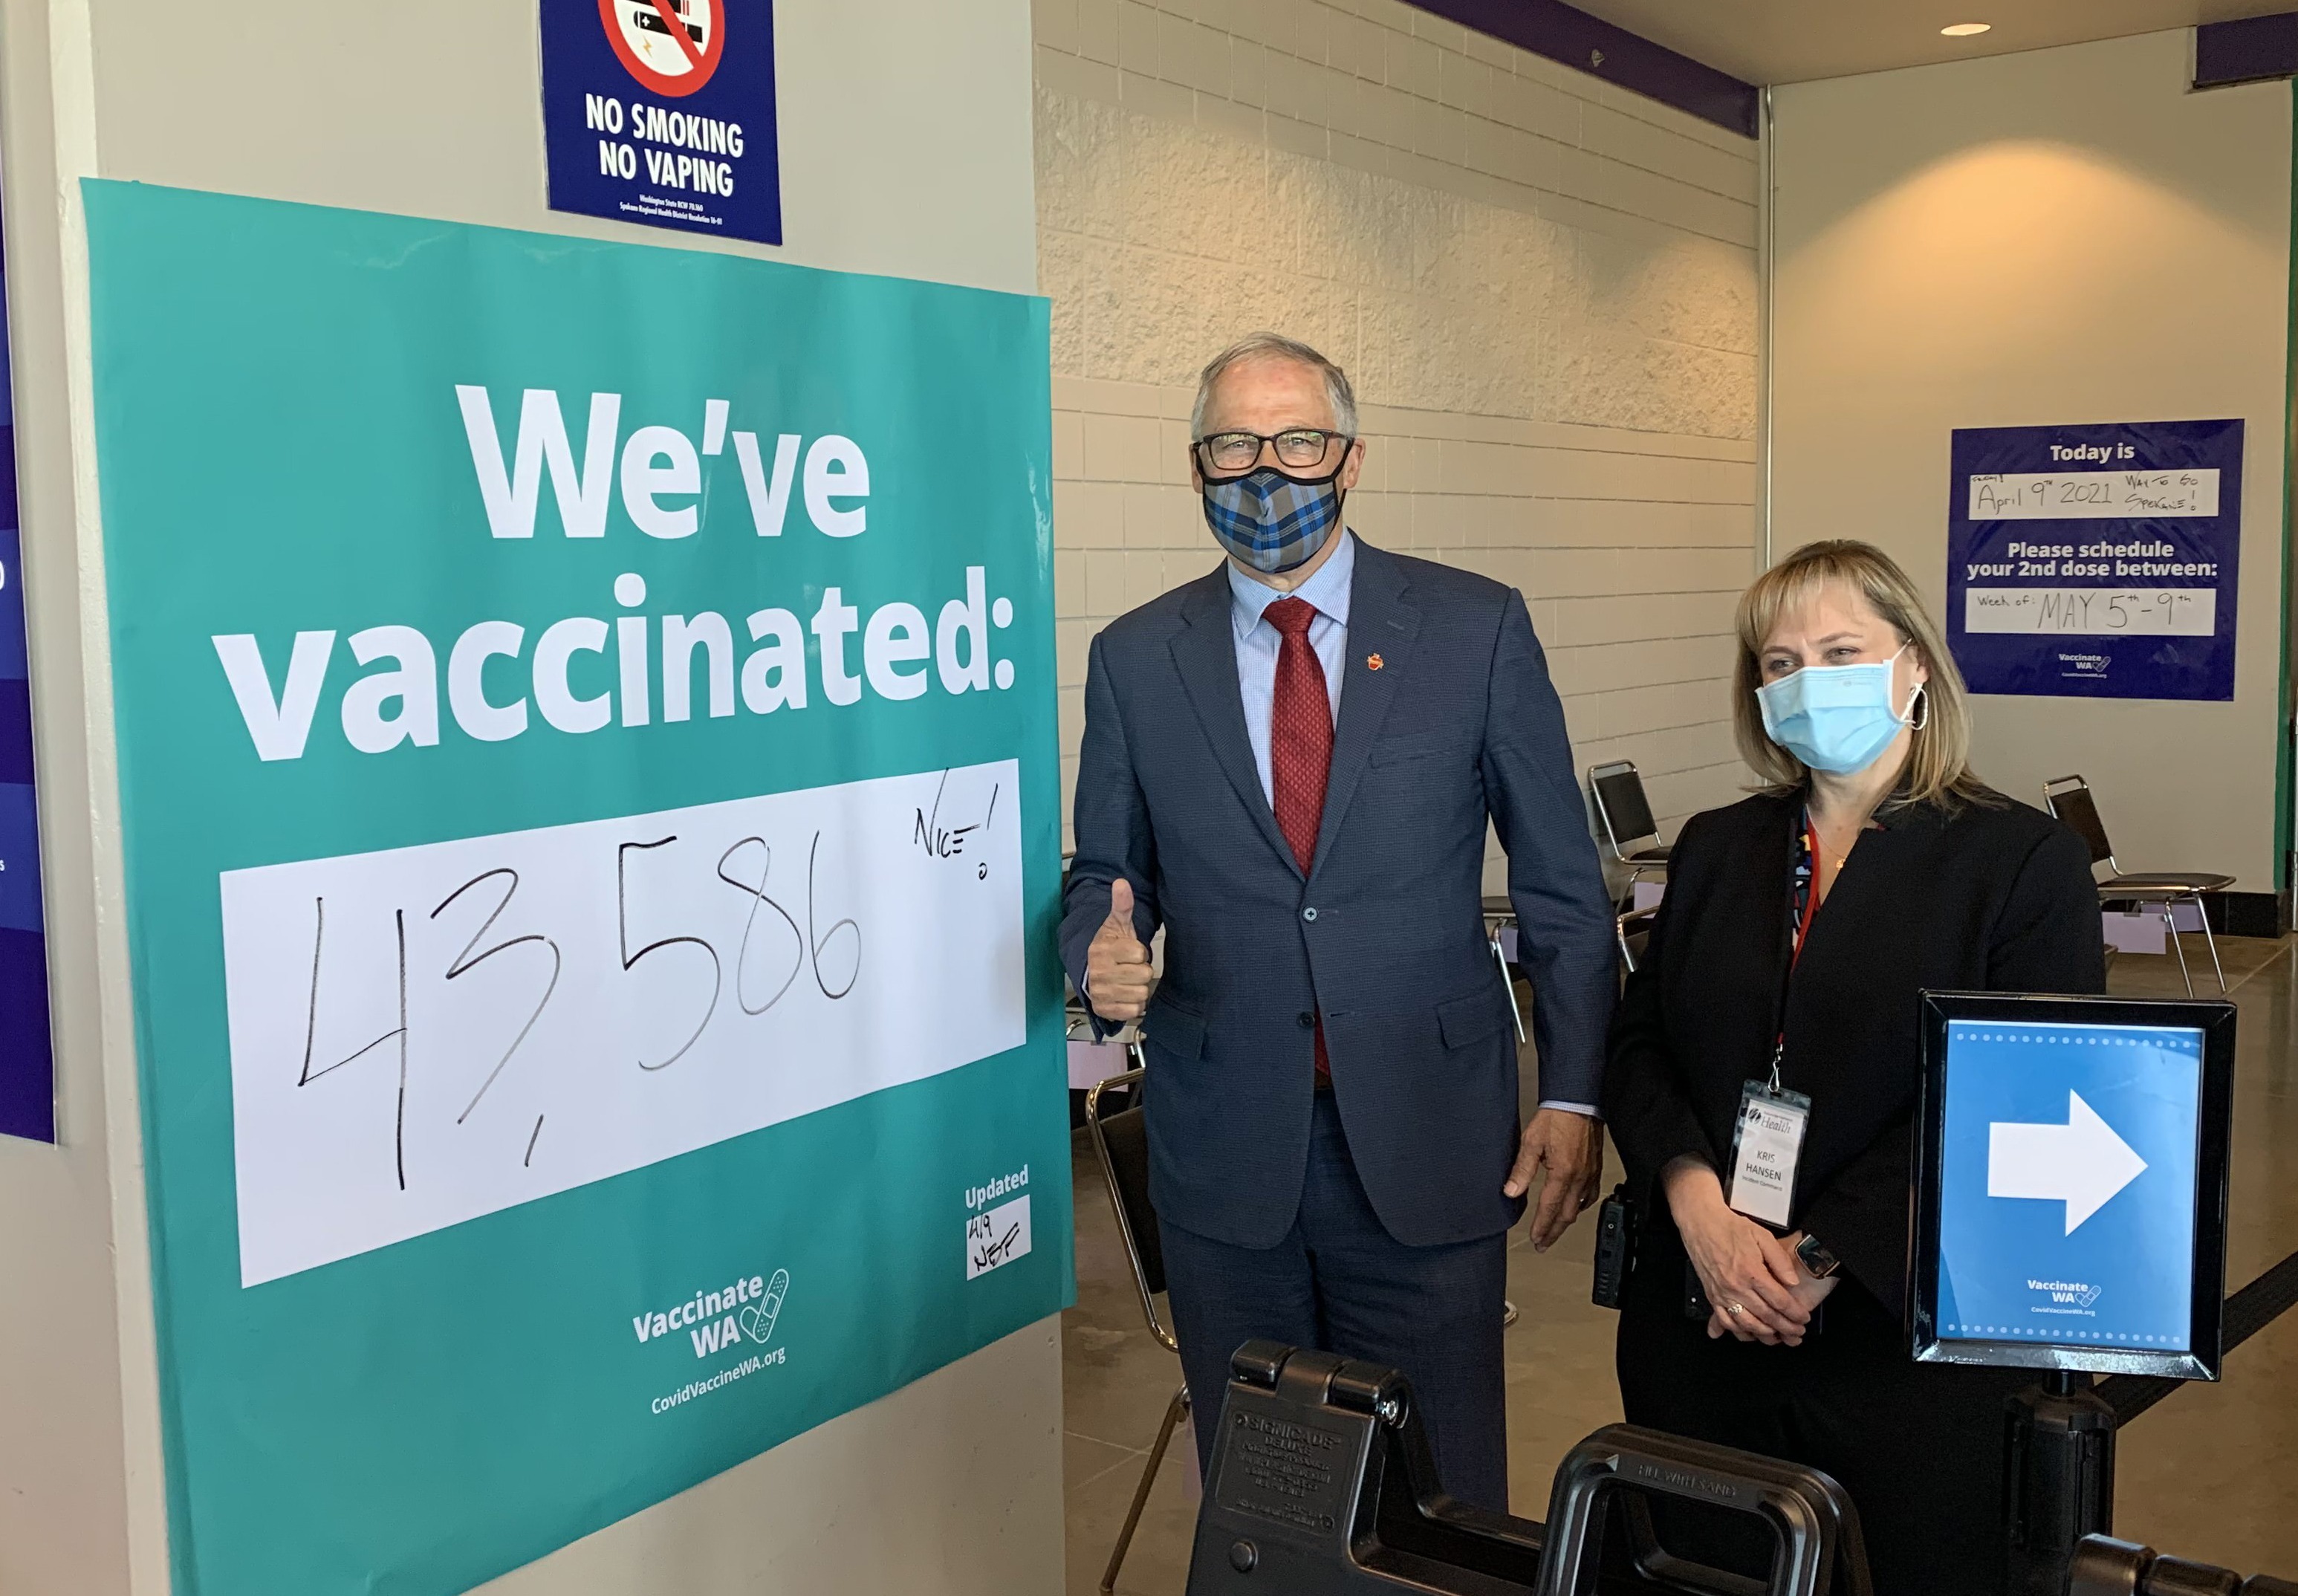 Washington Gov. Jay Inslee toured a mass COVID-19 vaccination site at the Spokane Arena on April 4, 2021, the same day he announced changes to the evaluation metric for how the state may move counties back in reopening phases. Spokane is a county on the bubble of possibly moving back. Courtesy of the Governor's Office via Twitter